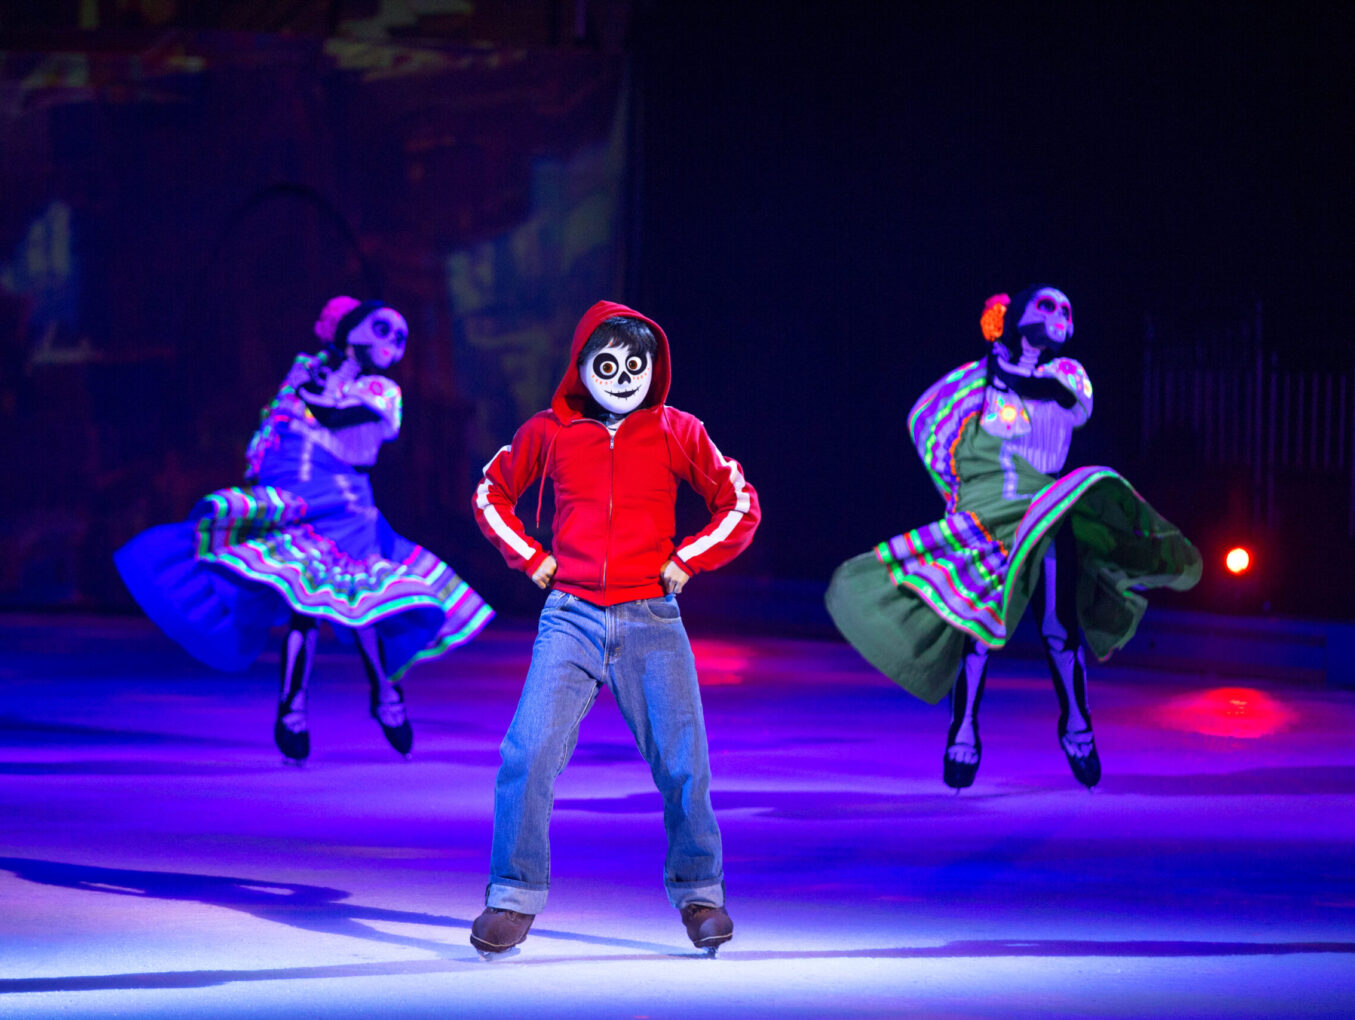 Skate Into Magic with Disney on Ice